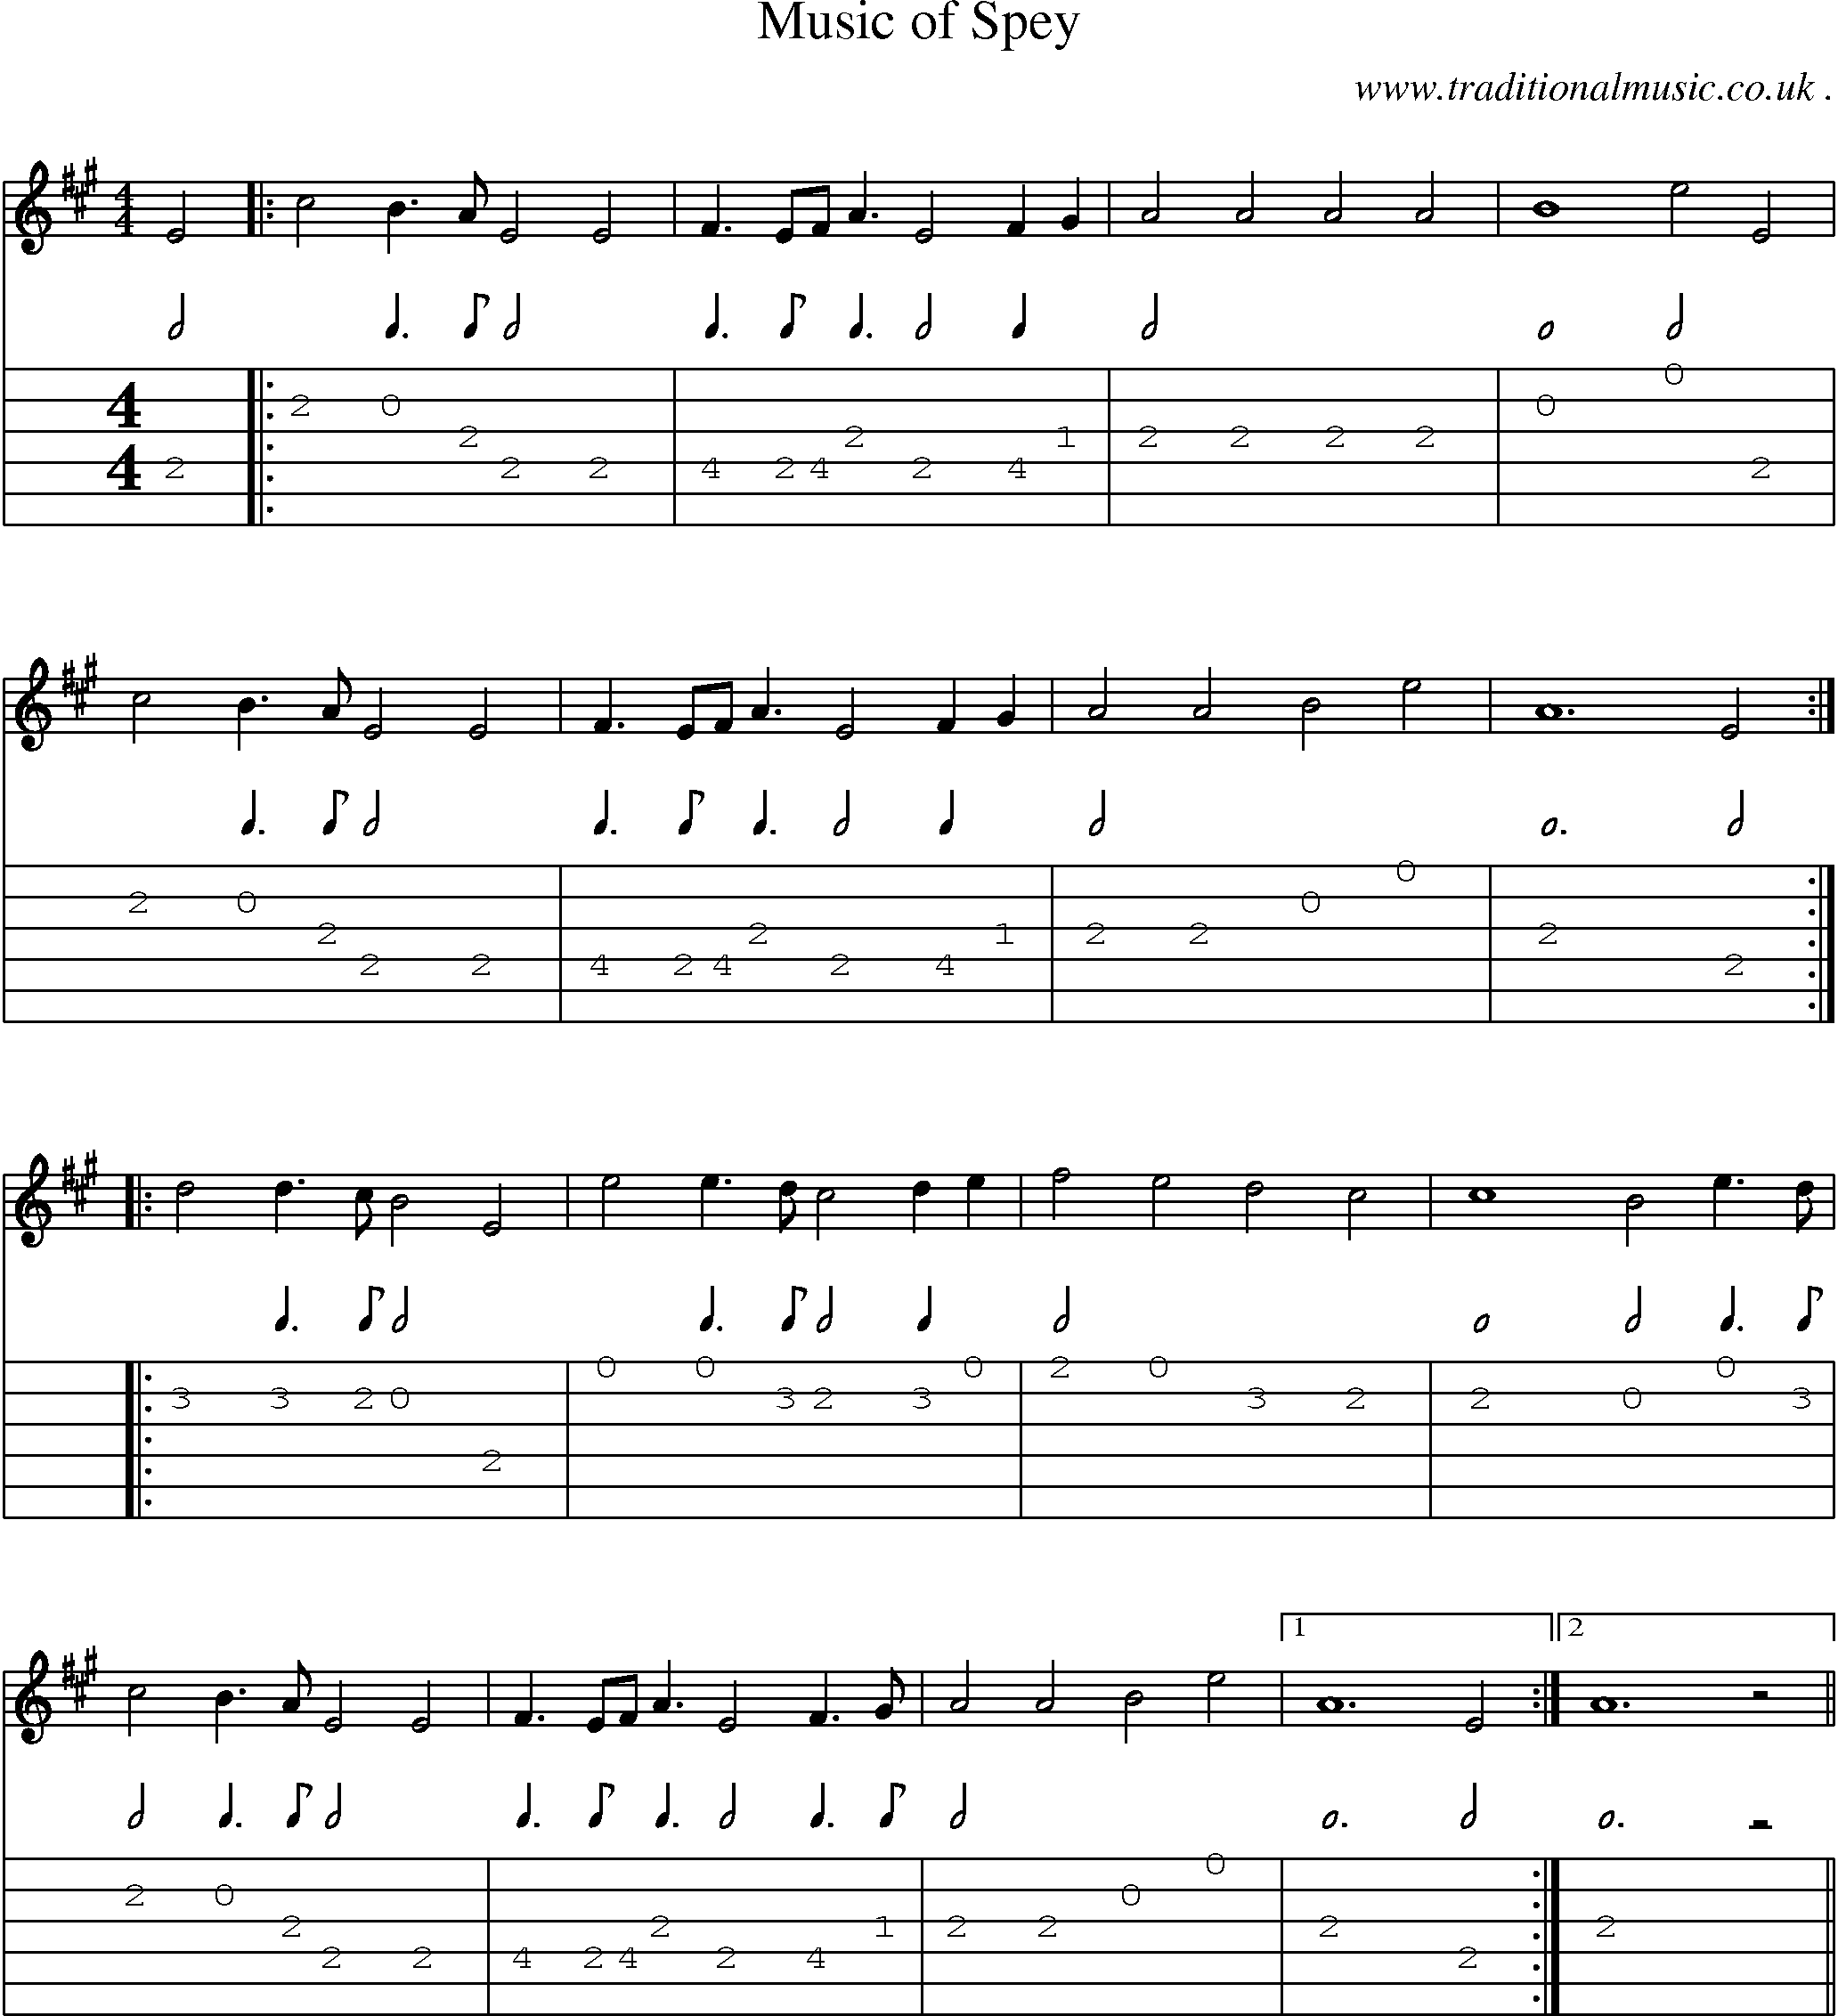 Sheet-music  score, Chords and Guitar Tabs for Music Of Spey